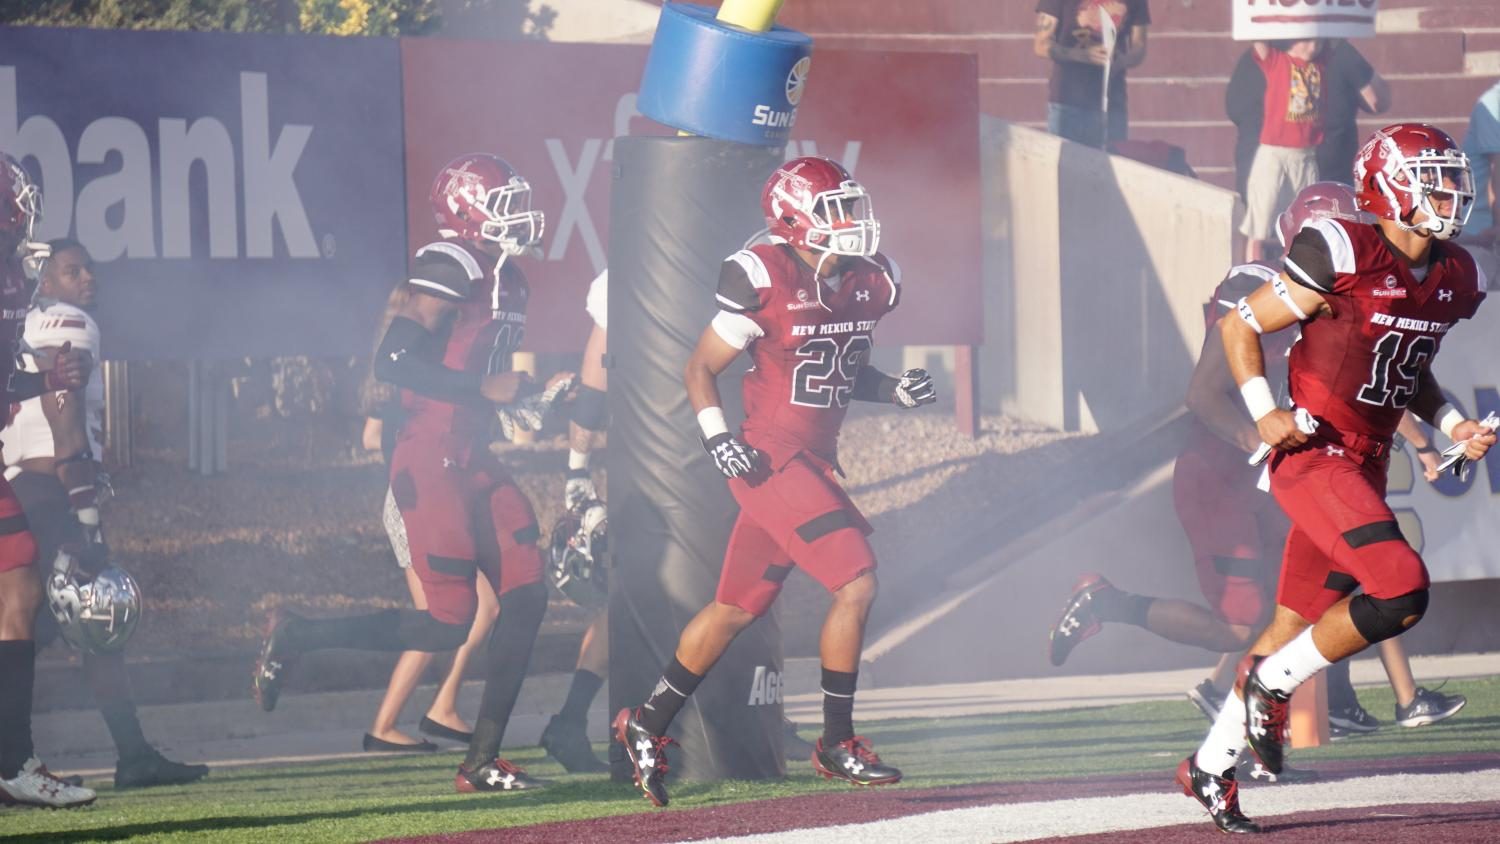 New Mexico State struggles to get anything going offensively in their 29-7 loss vs. Wyoming.